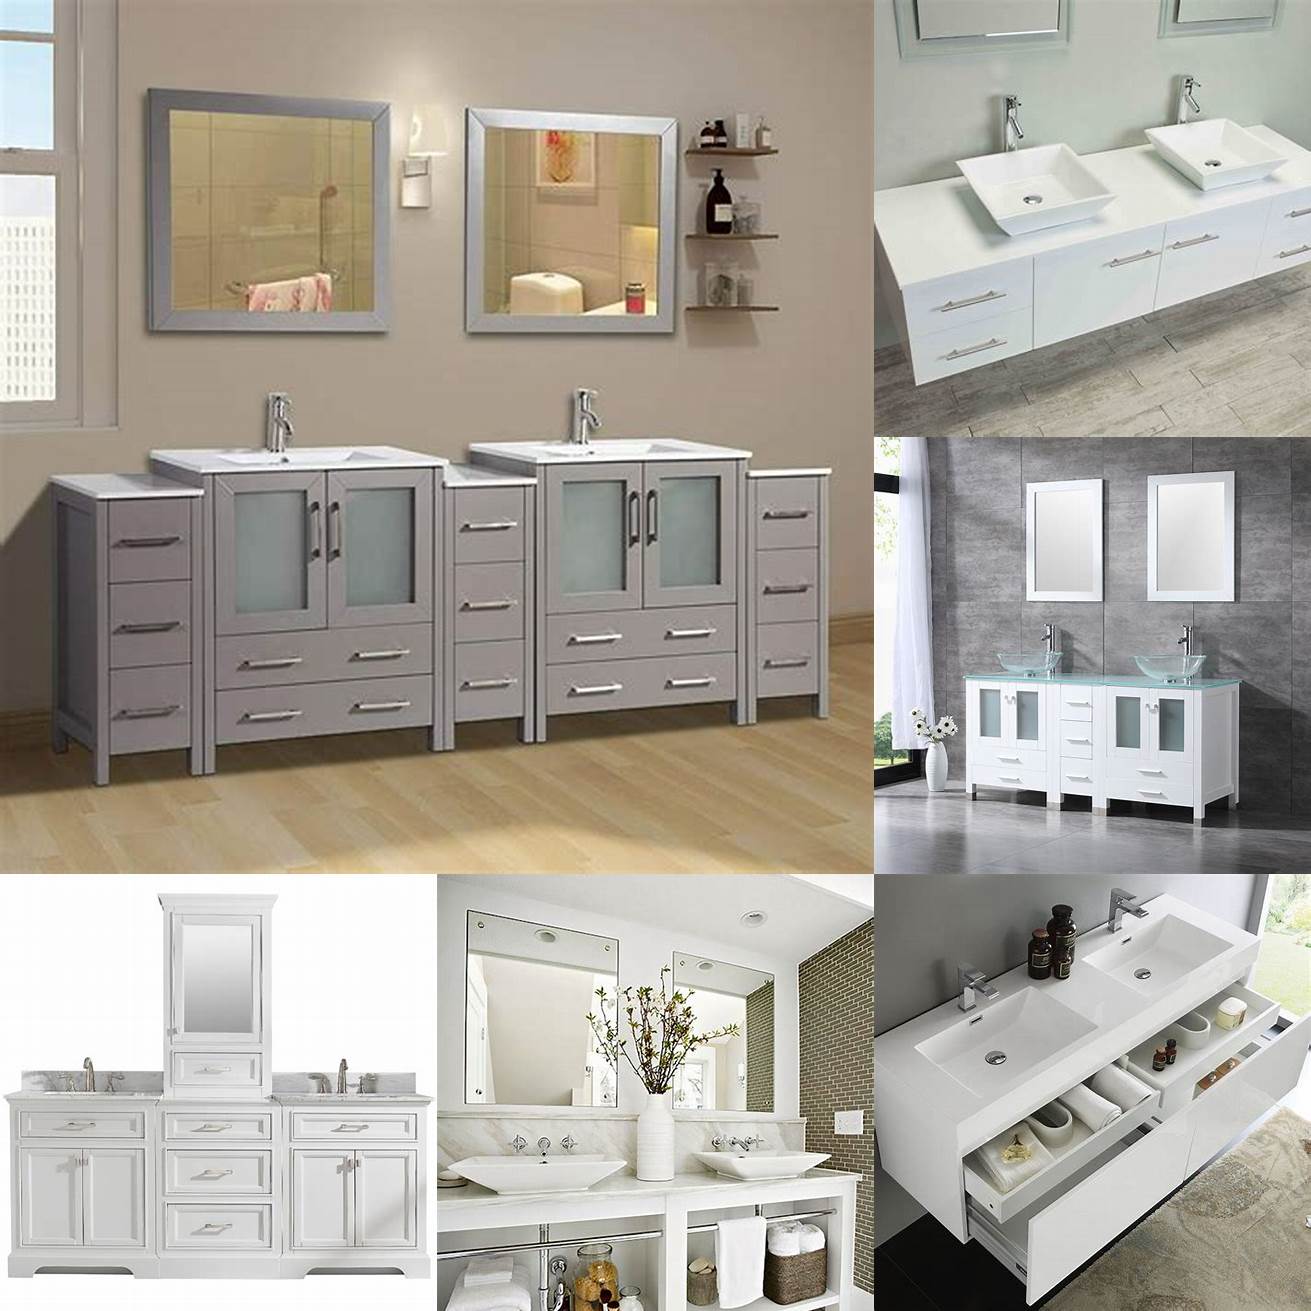 A spacious and modern modular bathroom vanity with a double sink plenty of storage and a sleek white finish